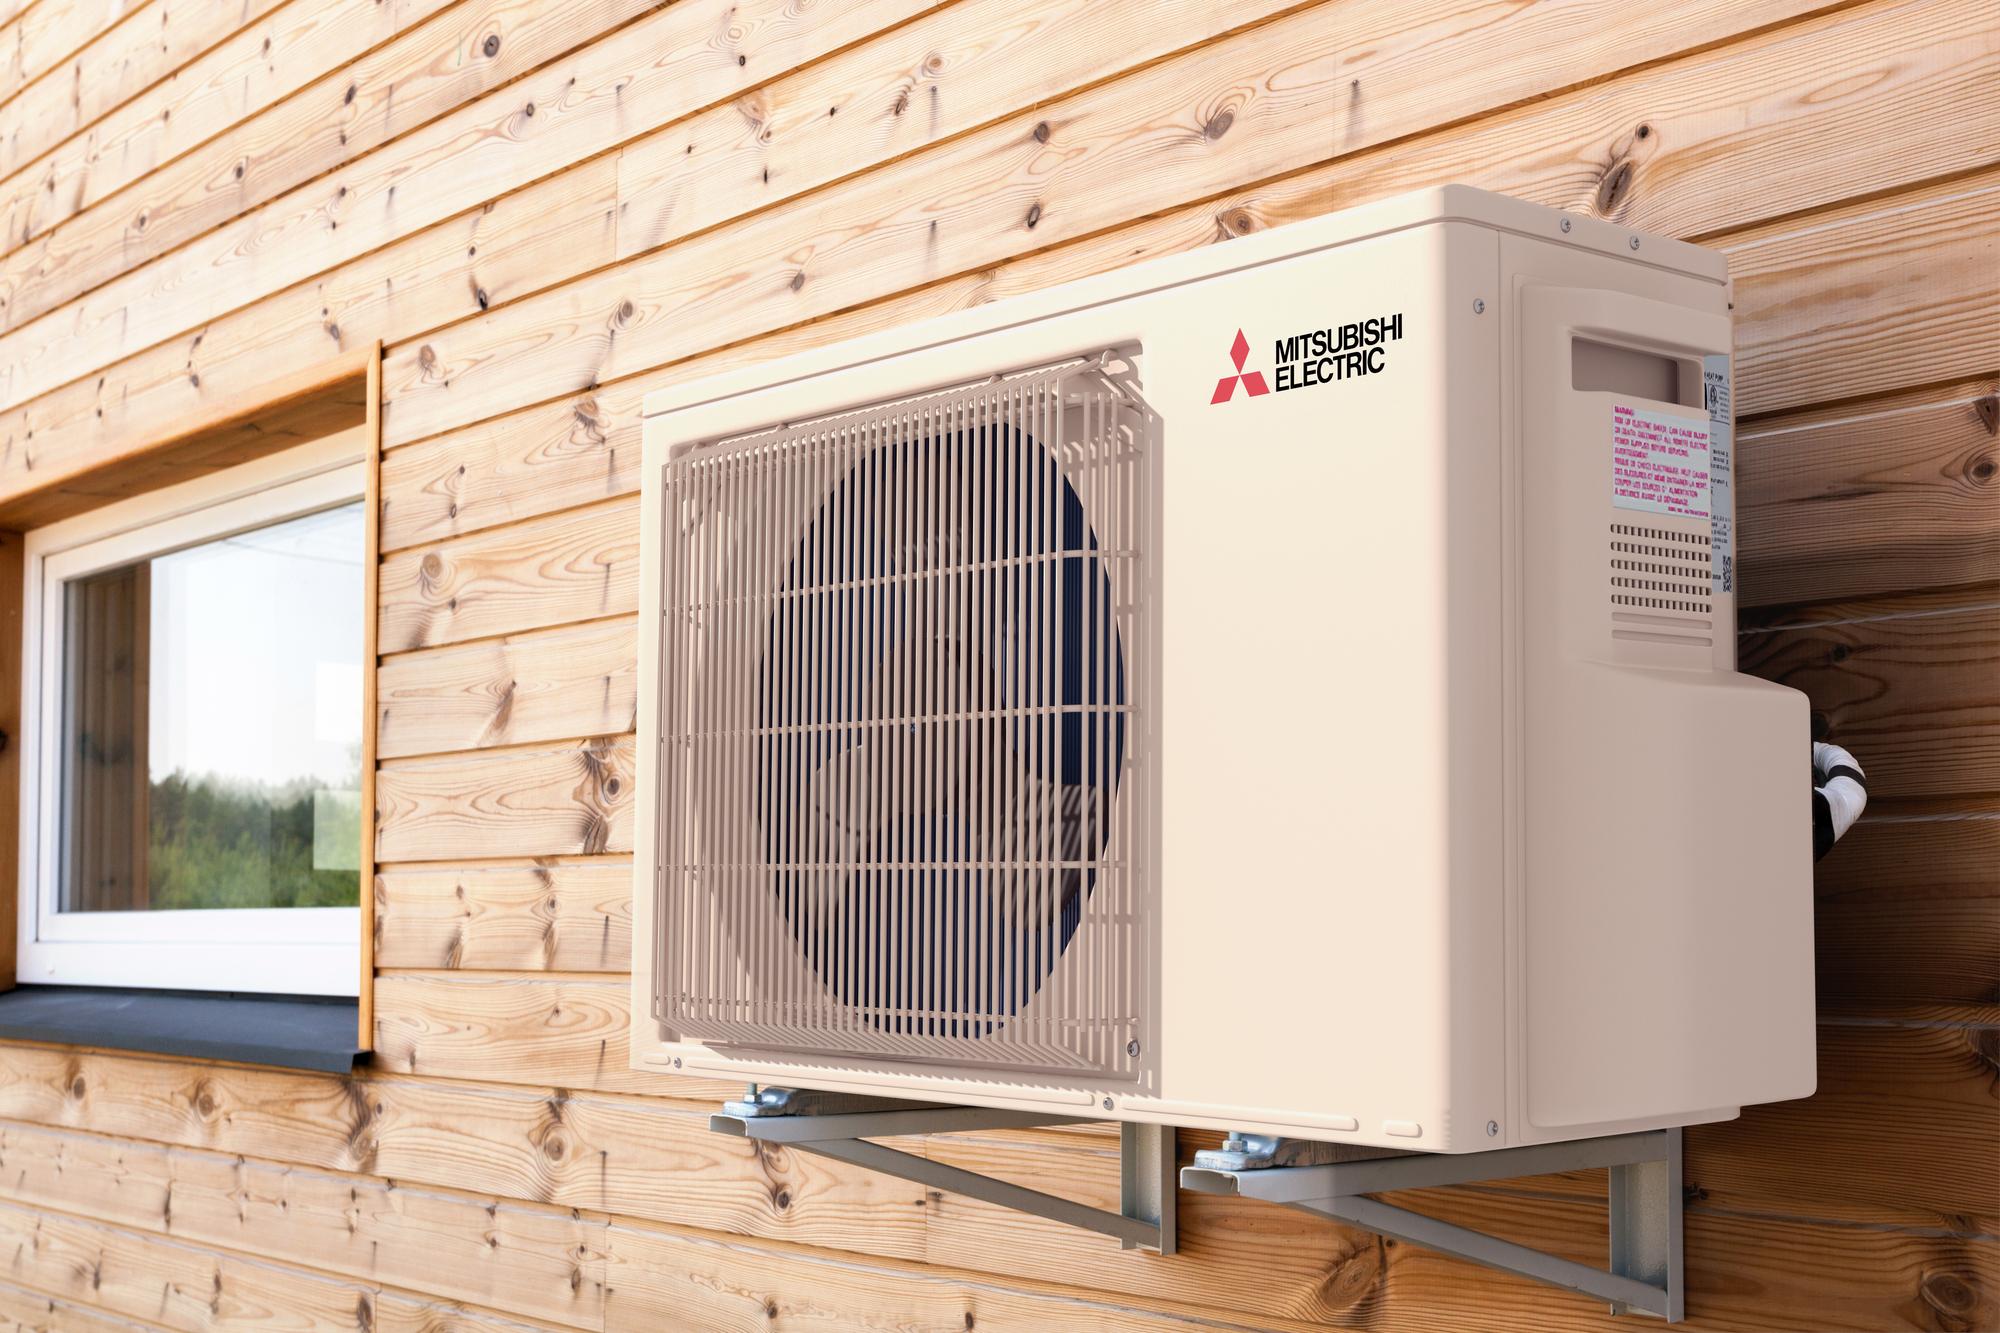 Not Your Grandma’s Heat Pump: Heating and Cooling Technology, Past and Present